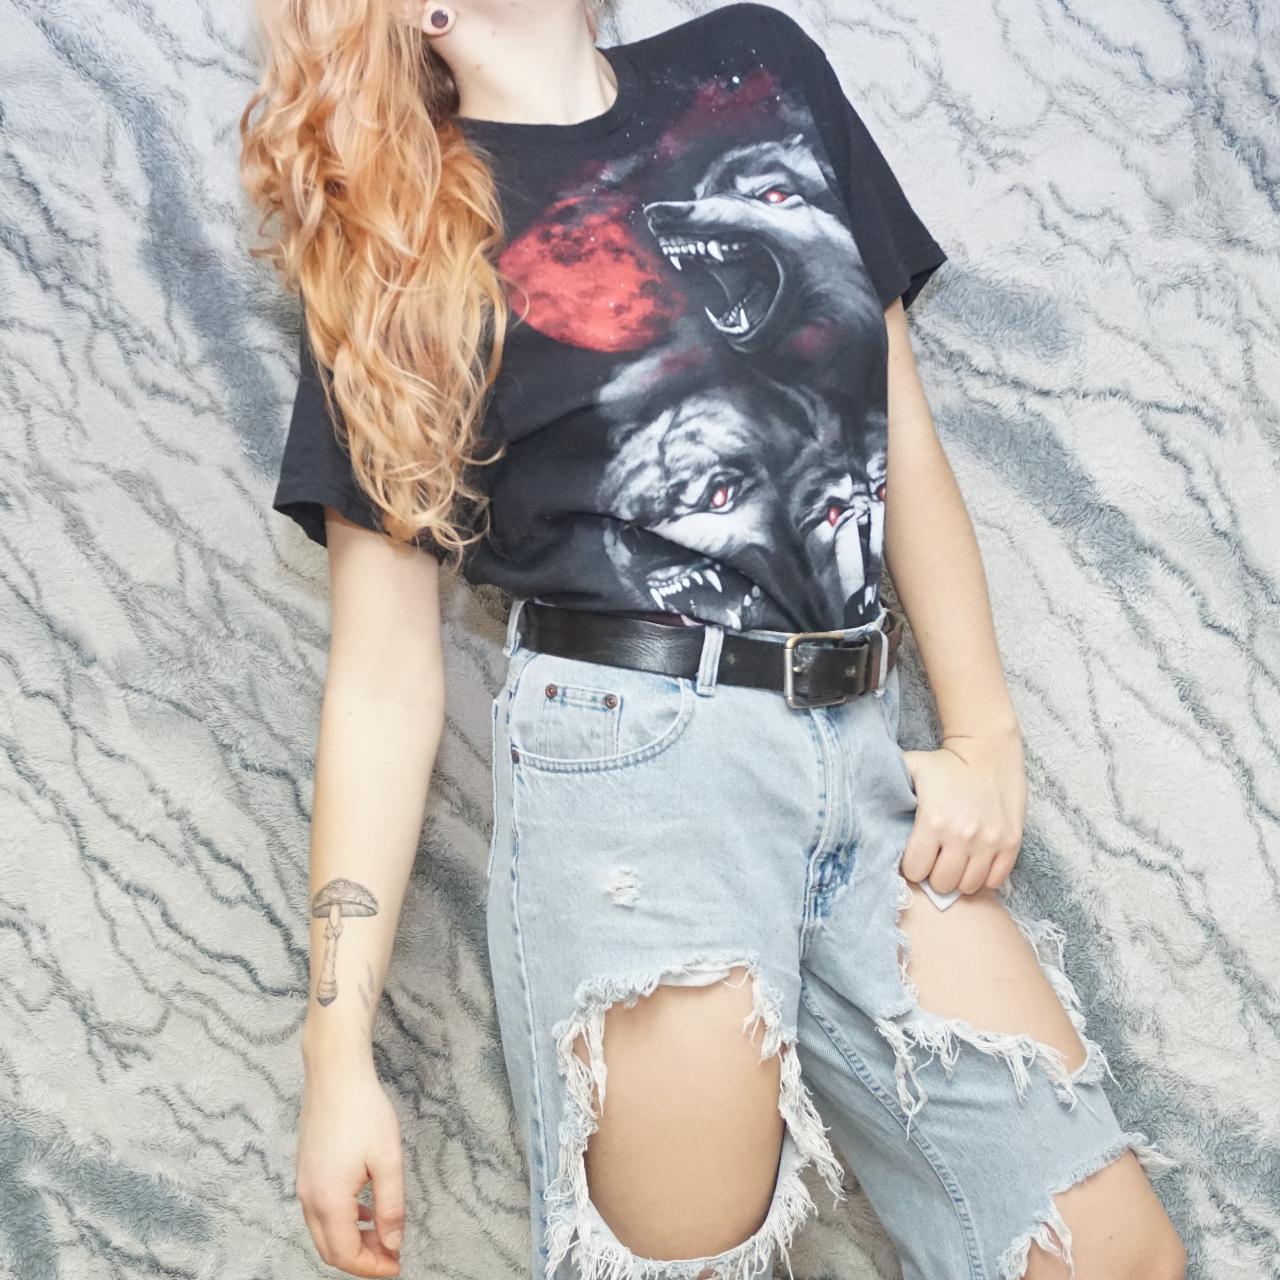 Product Image 1 - Blood Moon Wolf T
Size M

*Tagless.